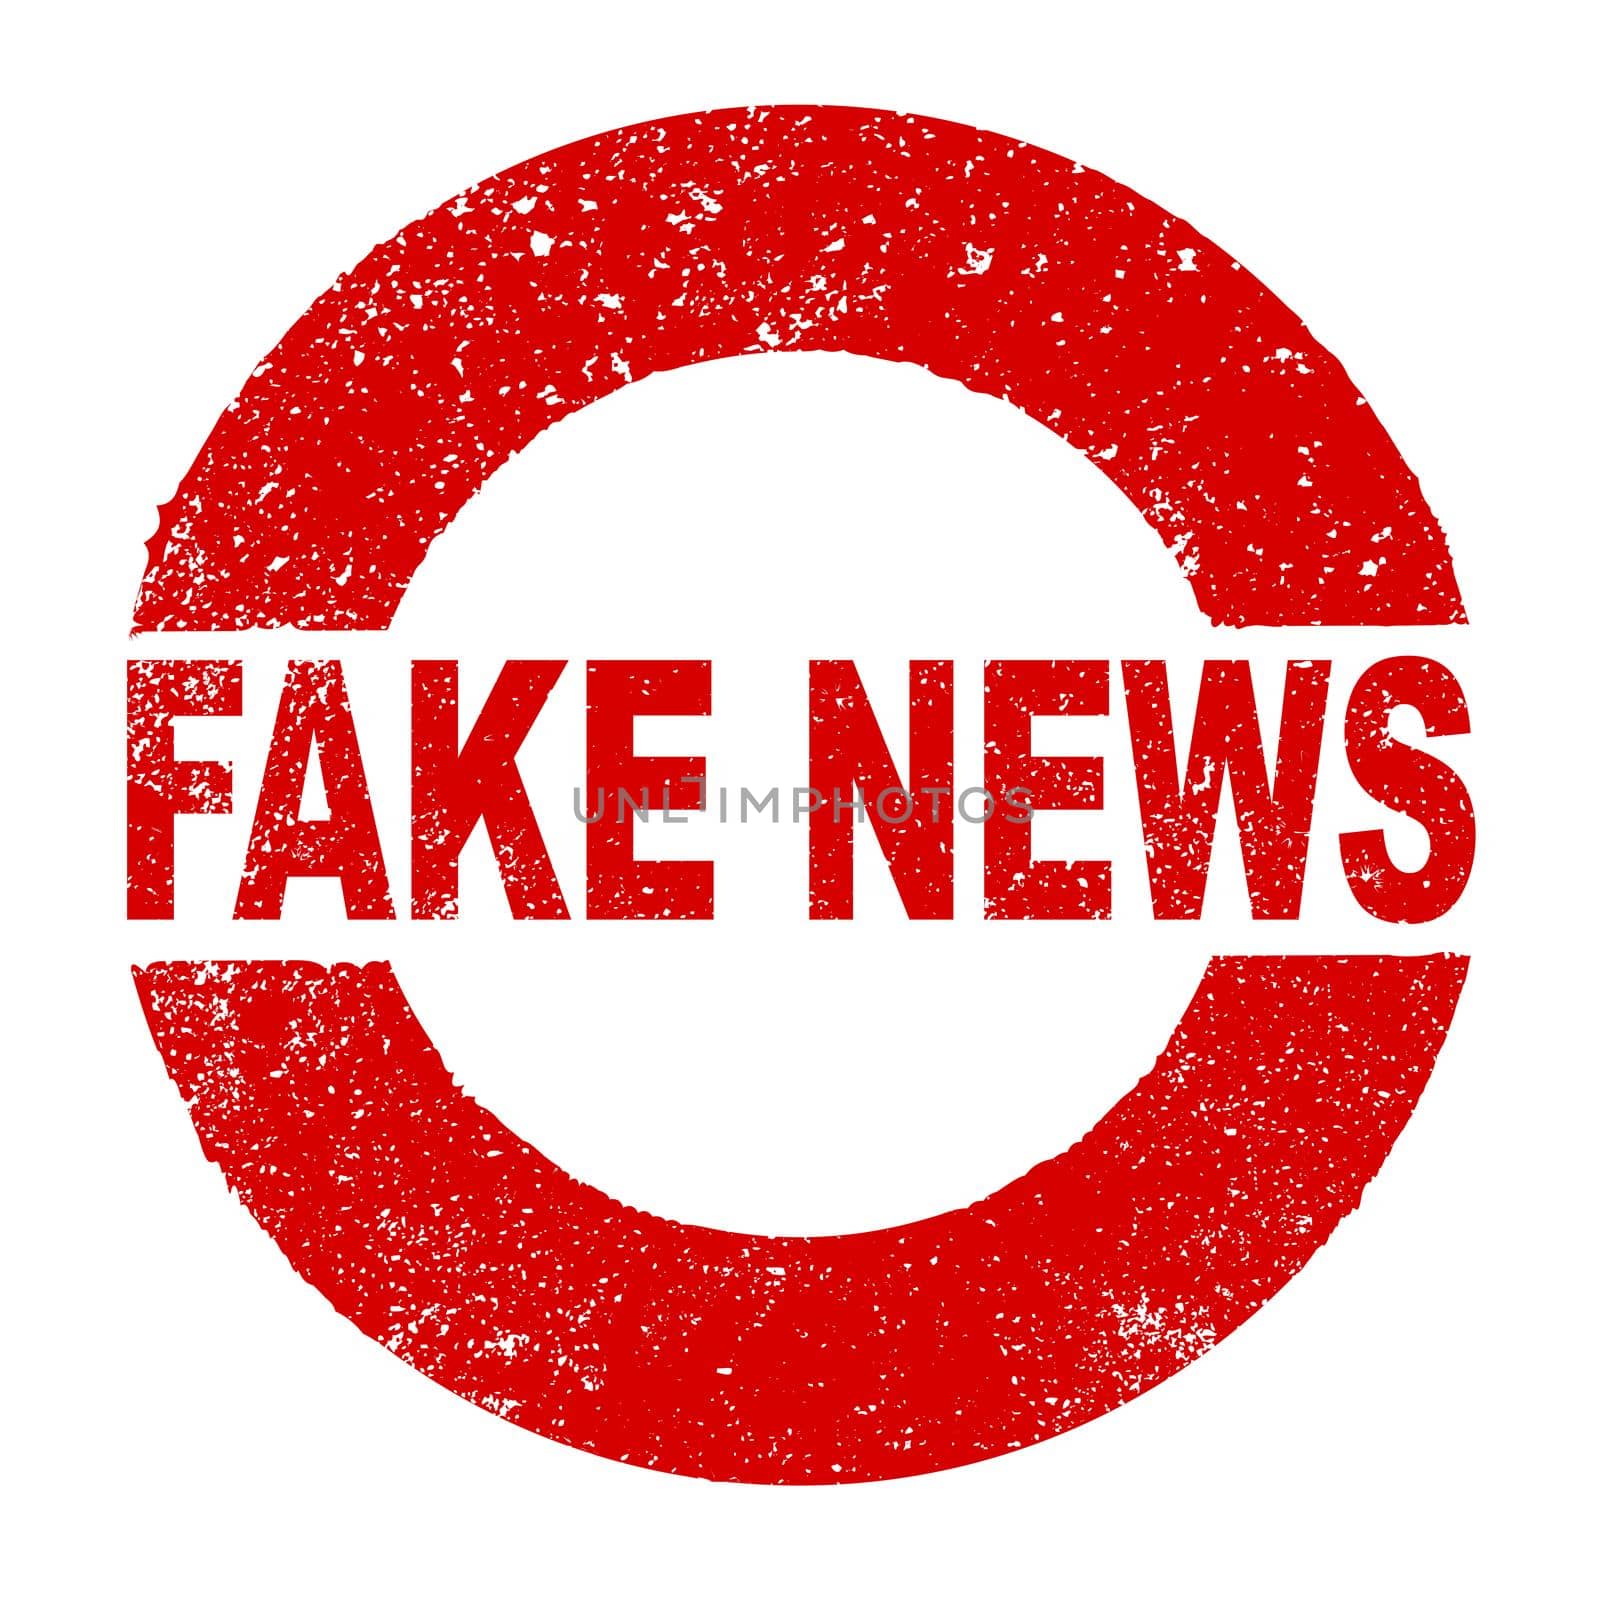 A grunge rubber ink stamp with the text FAKE NEWS over a white background